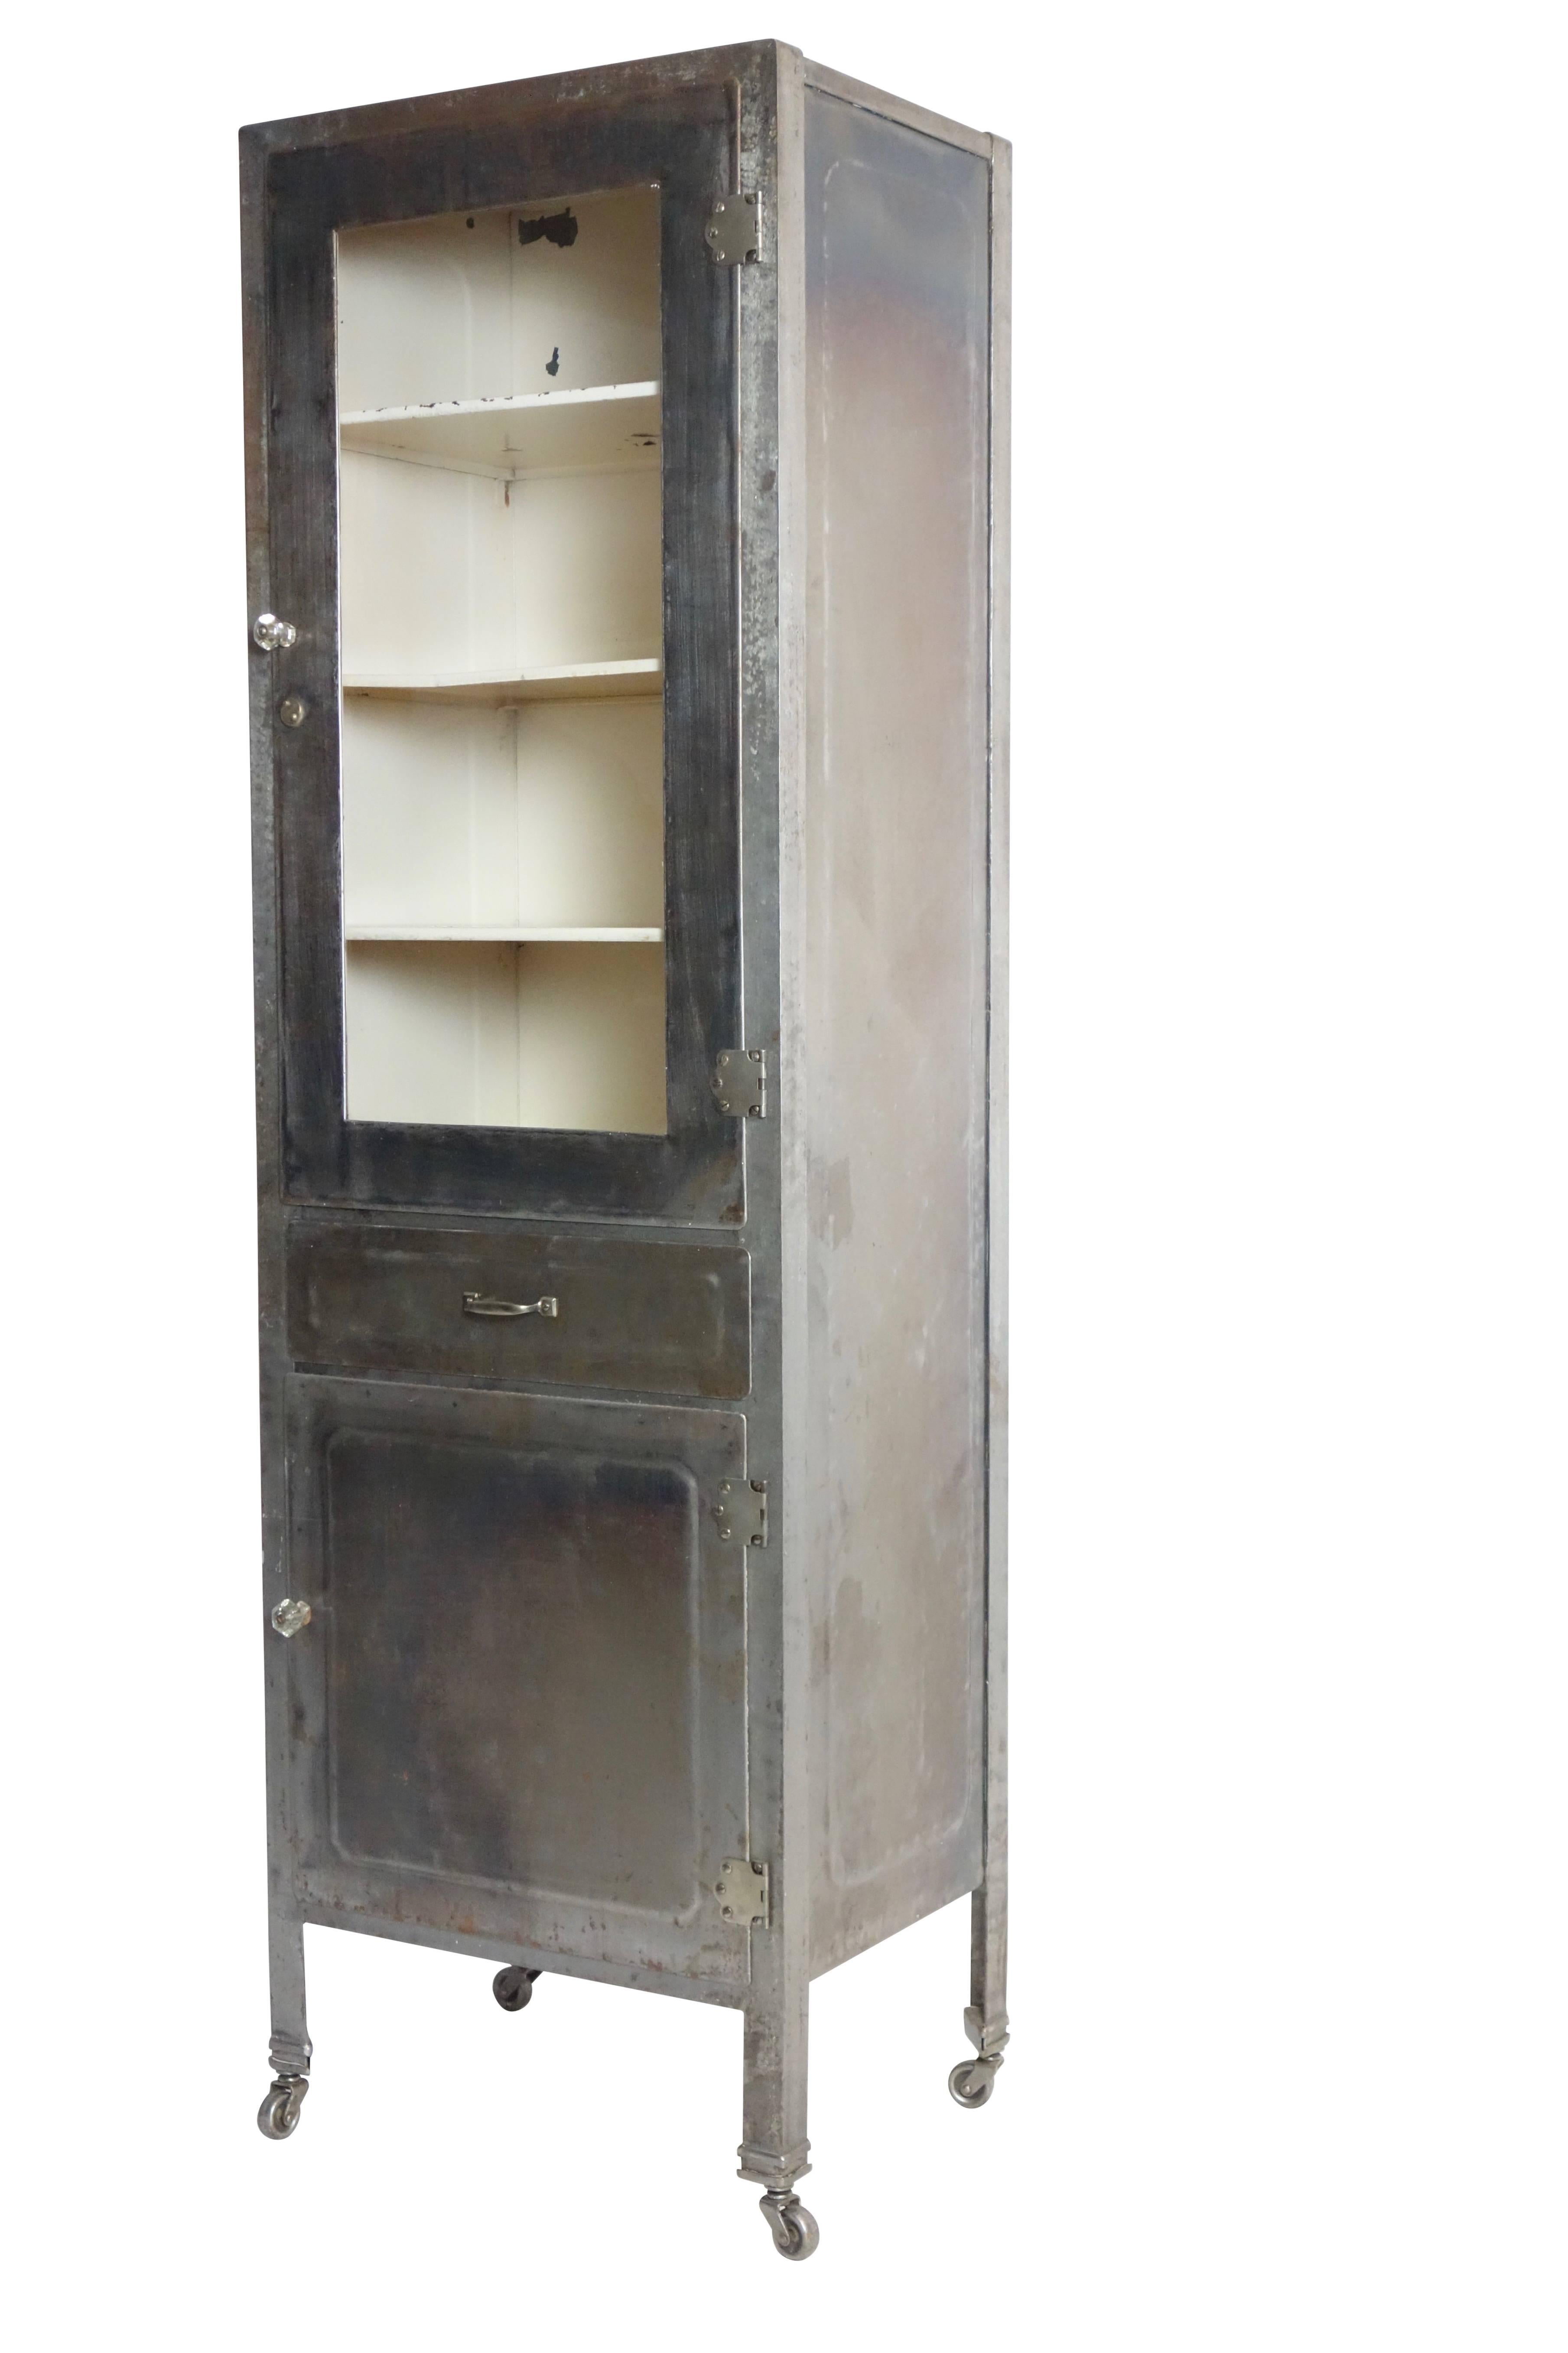 This is a steel medical cabinet on casters with three interior shelves behind a glass door. The lower compartment has two interior shelves.